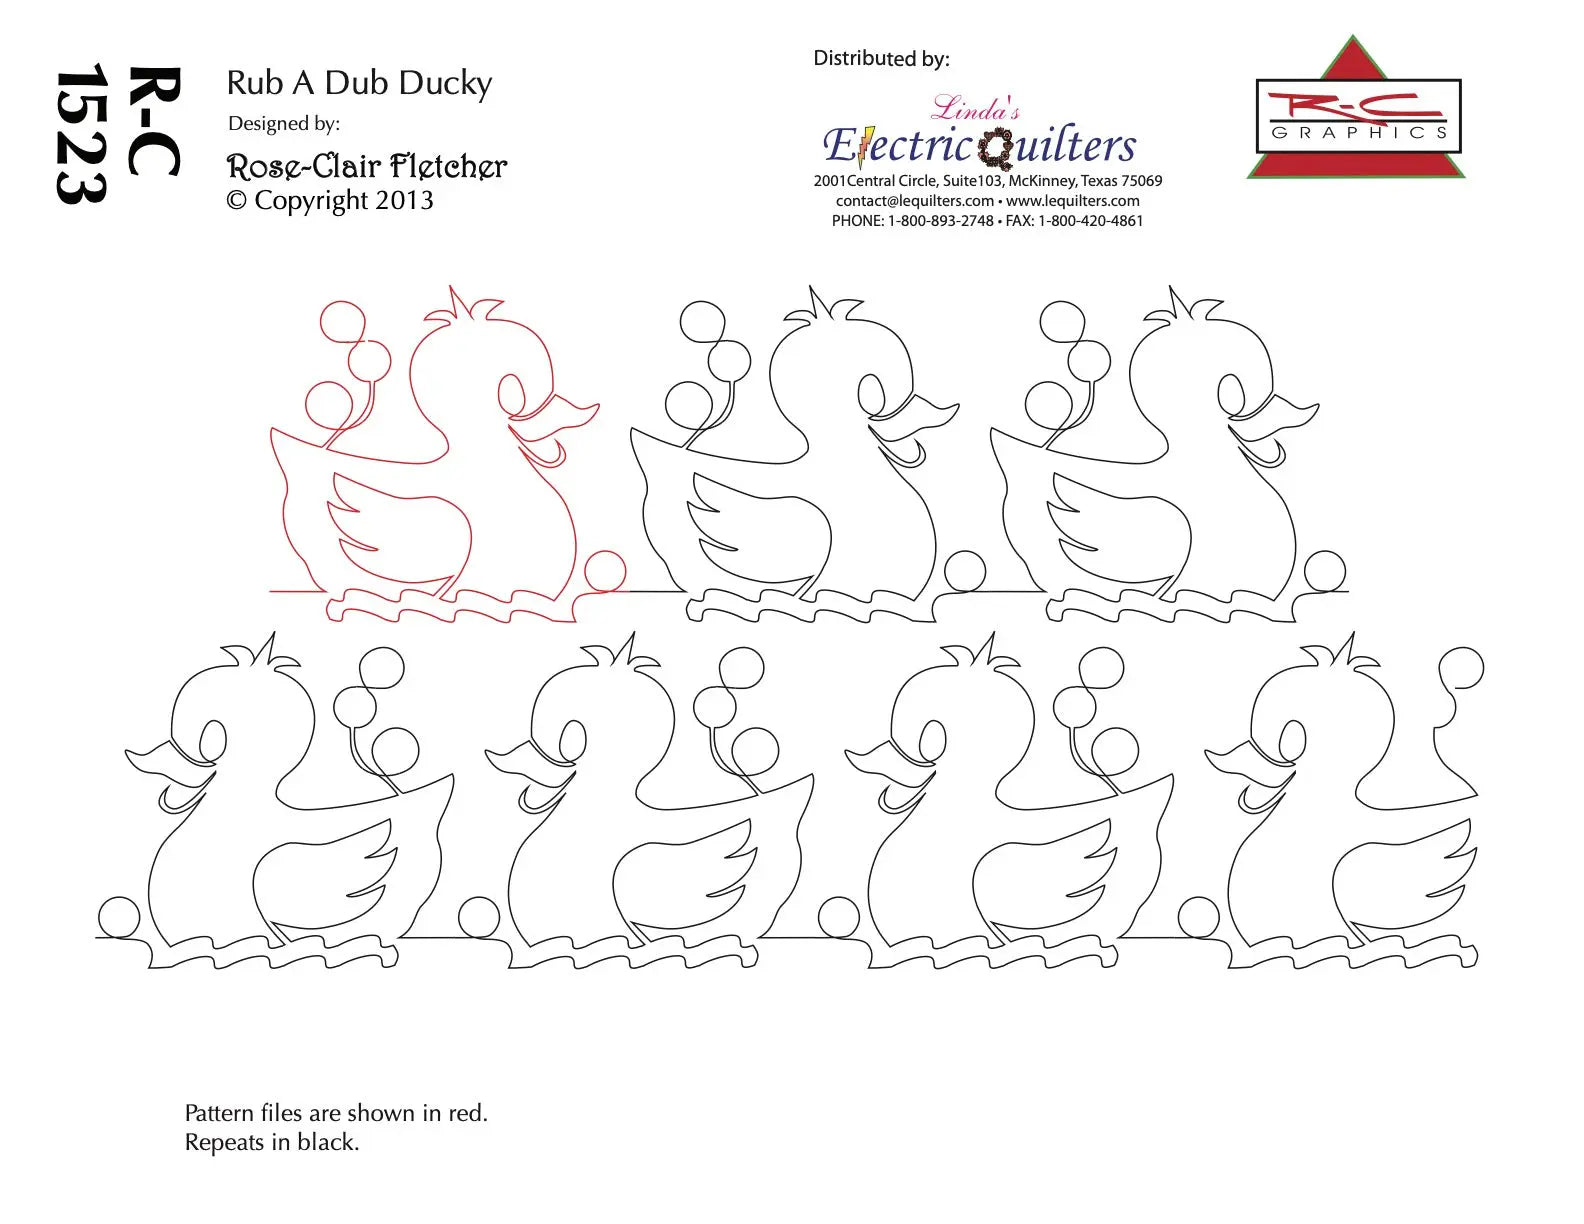 1526 Rub A Dub Ducky Pantograph by Rose-Clair Fletcher - Linda's Electric Quilters